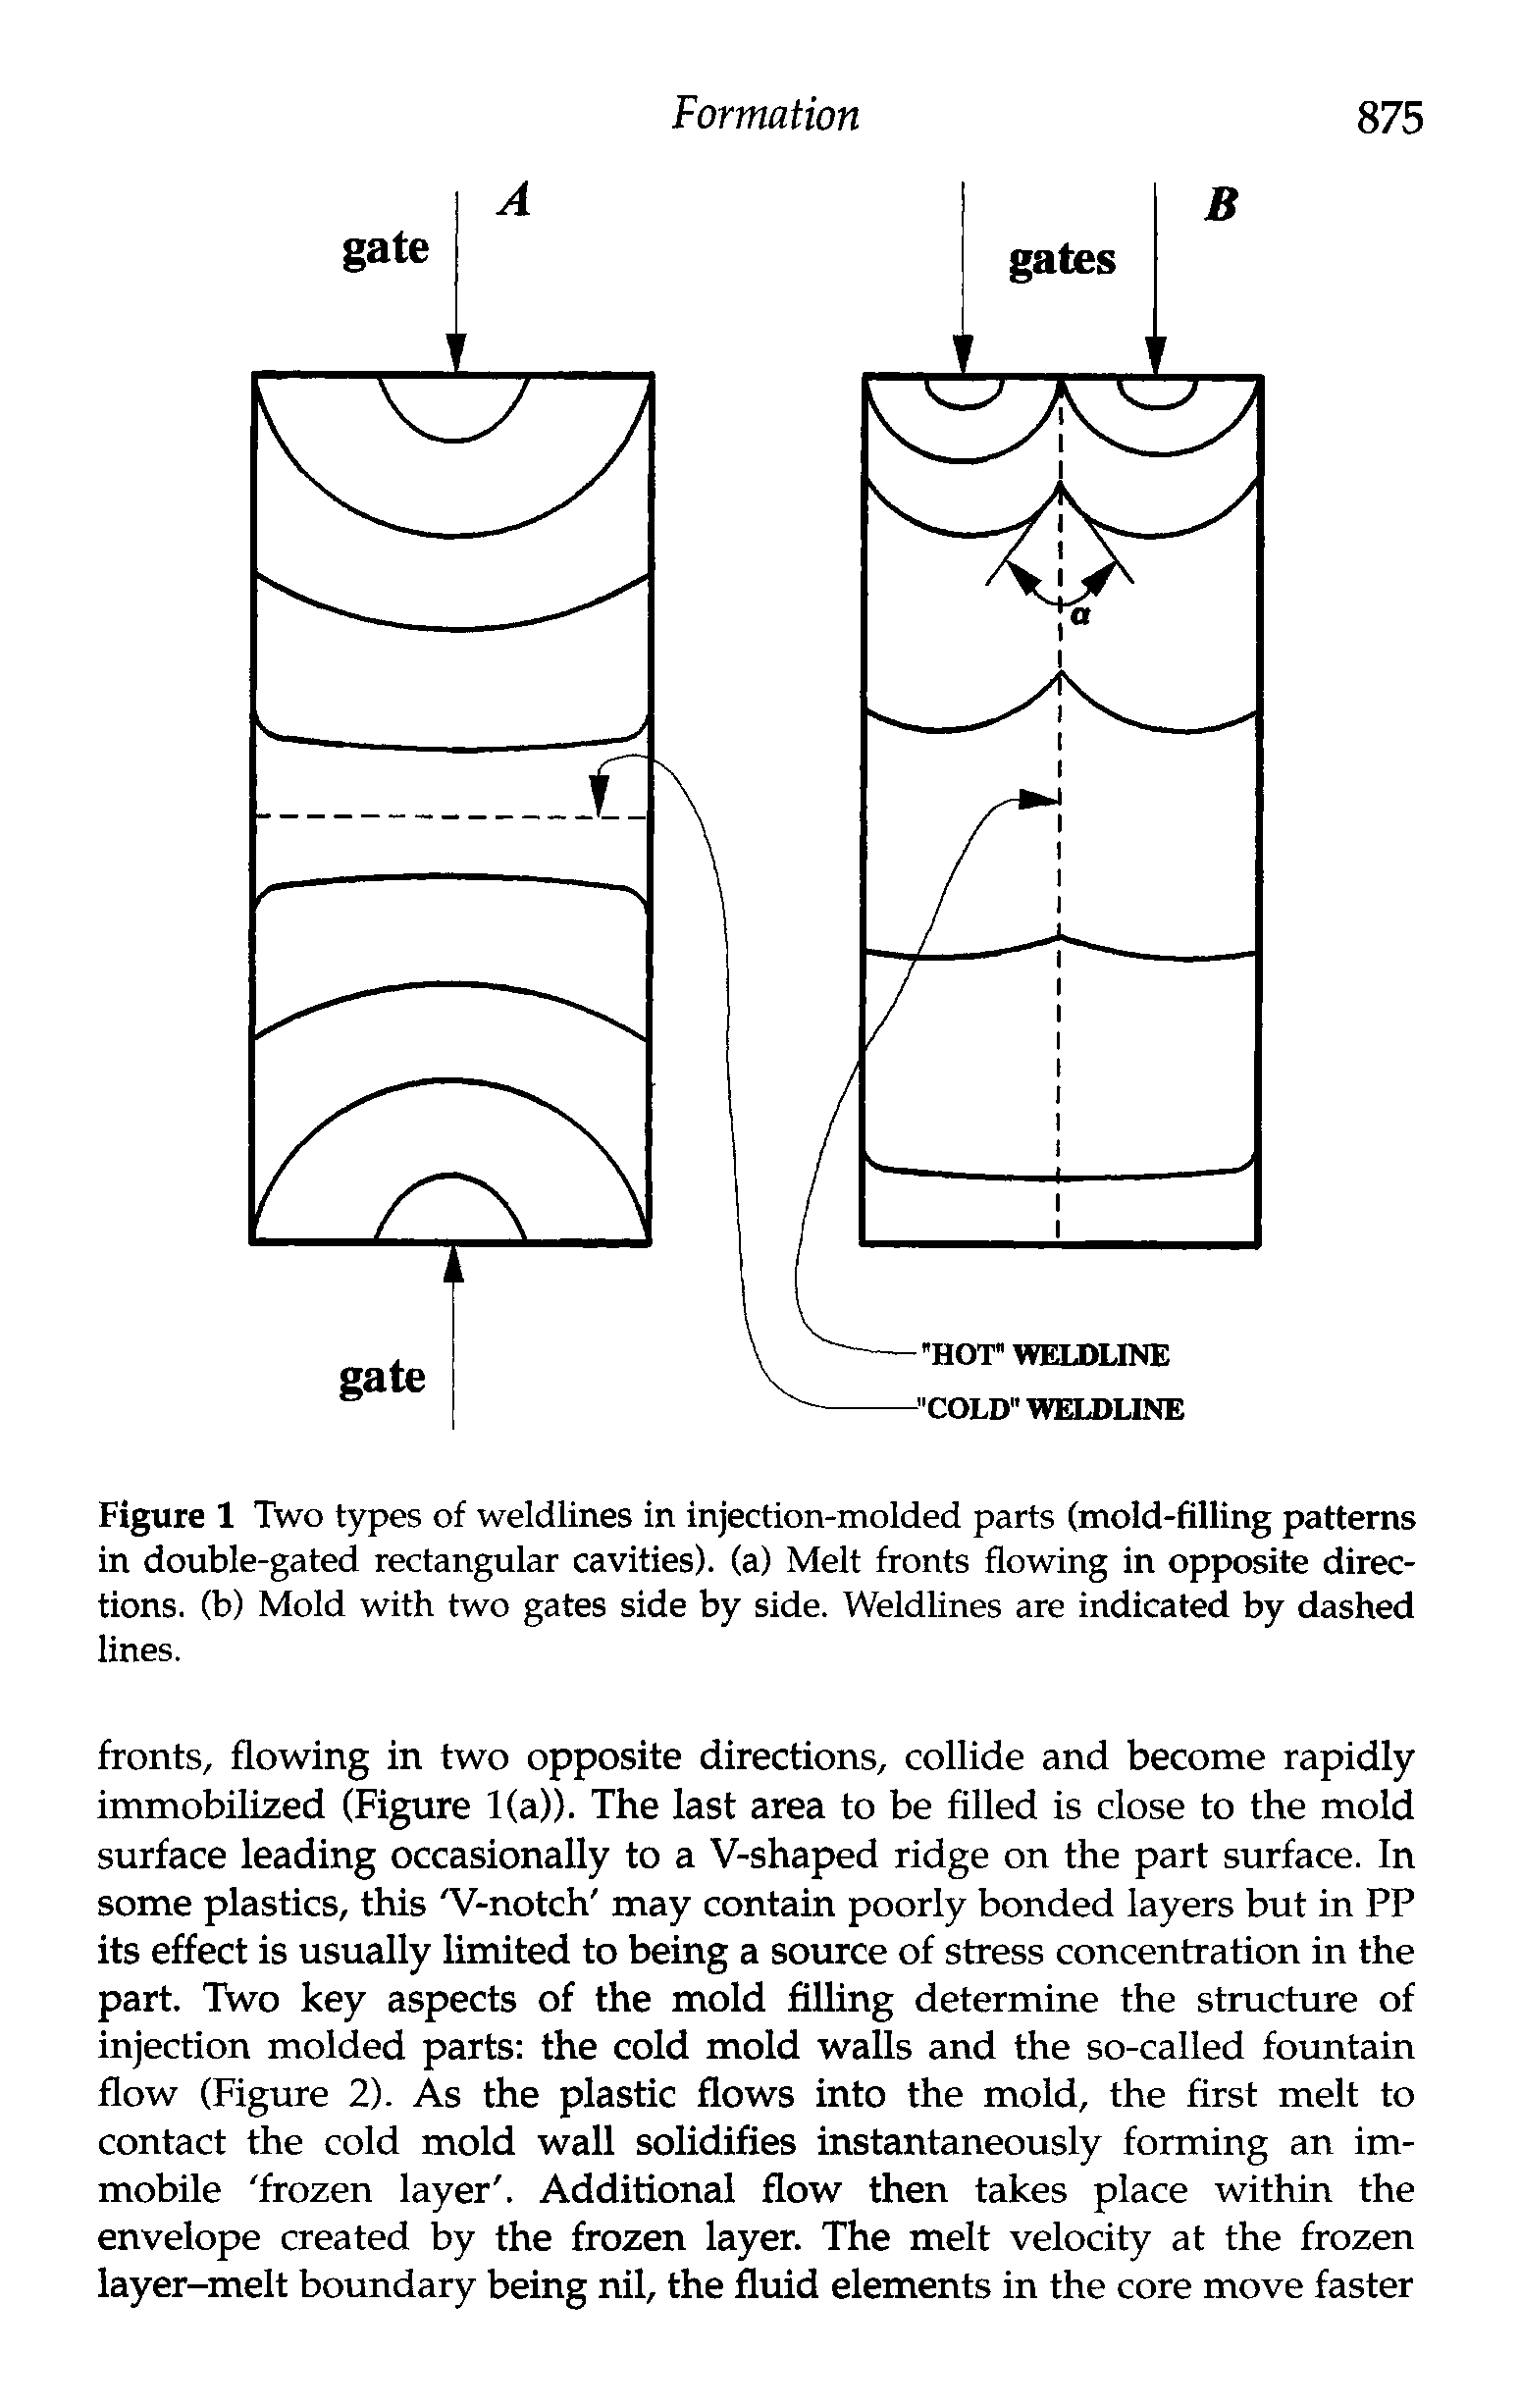 Figure 1 Two types of weldlines in injection-molded parts (mold-filling patterns in double-gated rectangular cavities), (a) Melt fronts flowing in opposite directions. (b) Mold with two gates side by side. Weldlines are indicated by dashed lines.